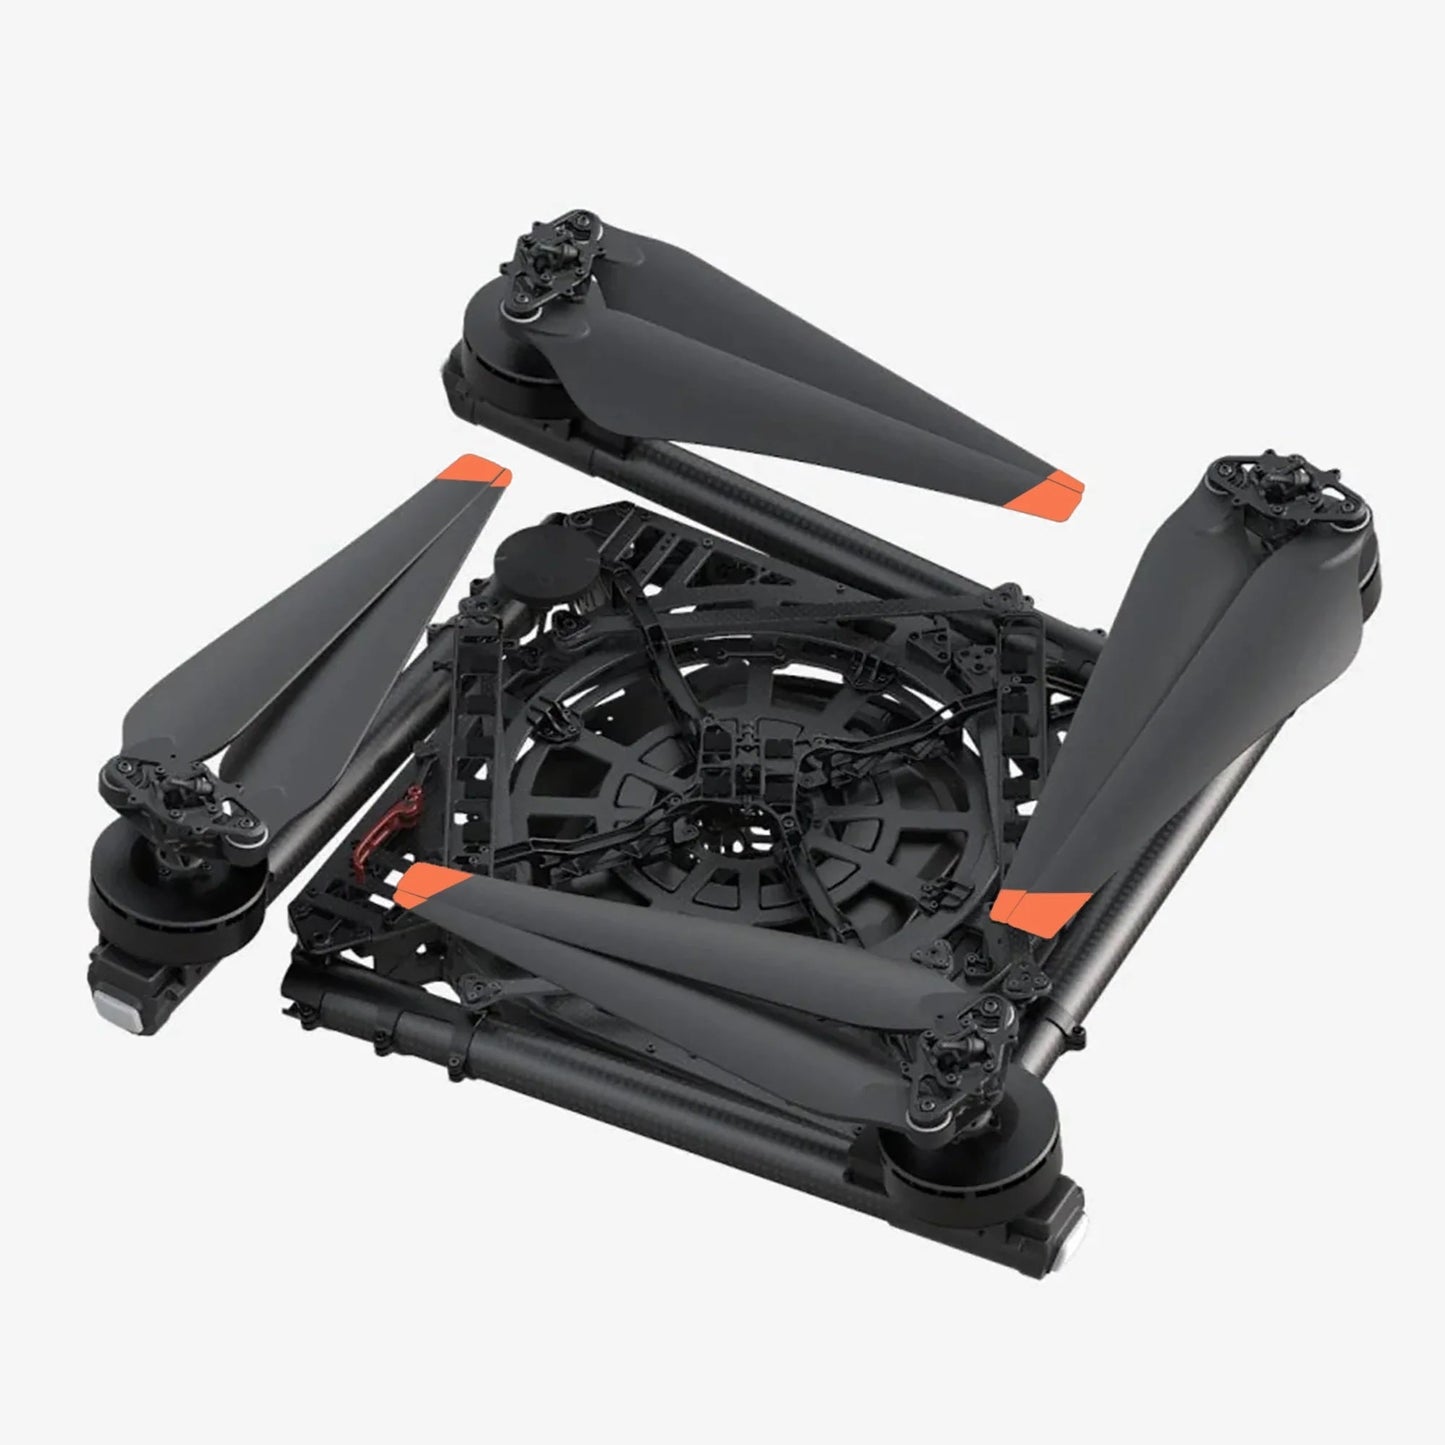 950-00118-05 Alta X (Travel Case, Not Gimbal Ready, Aircraft Only)